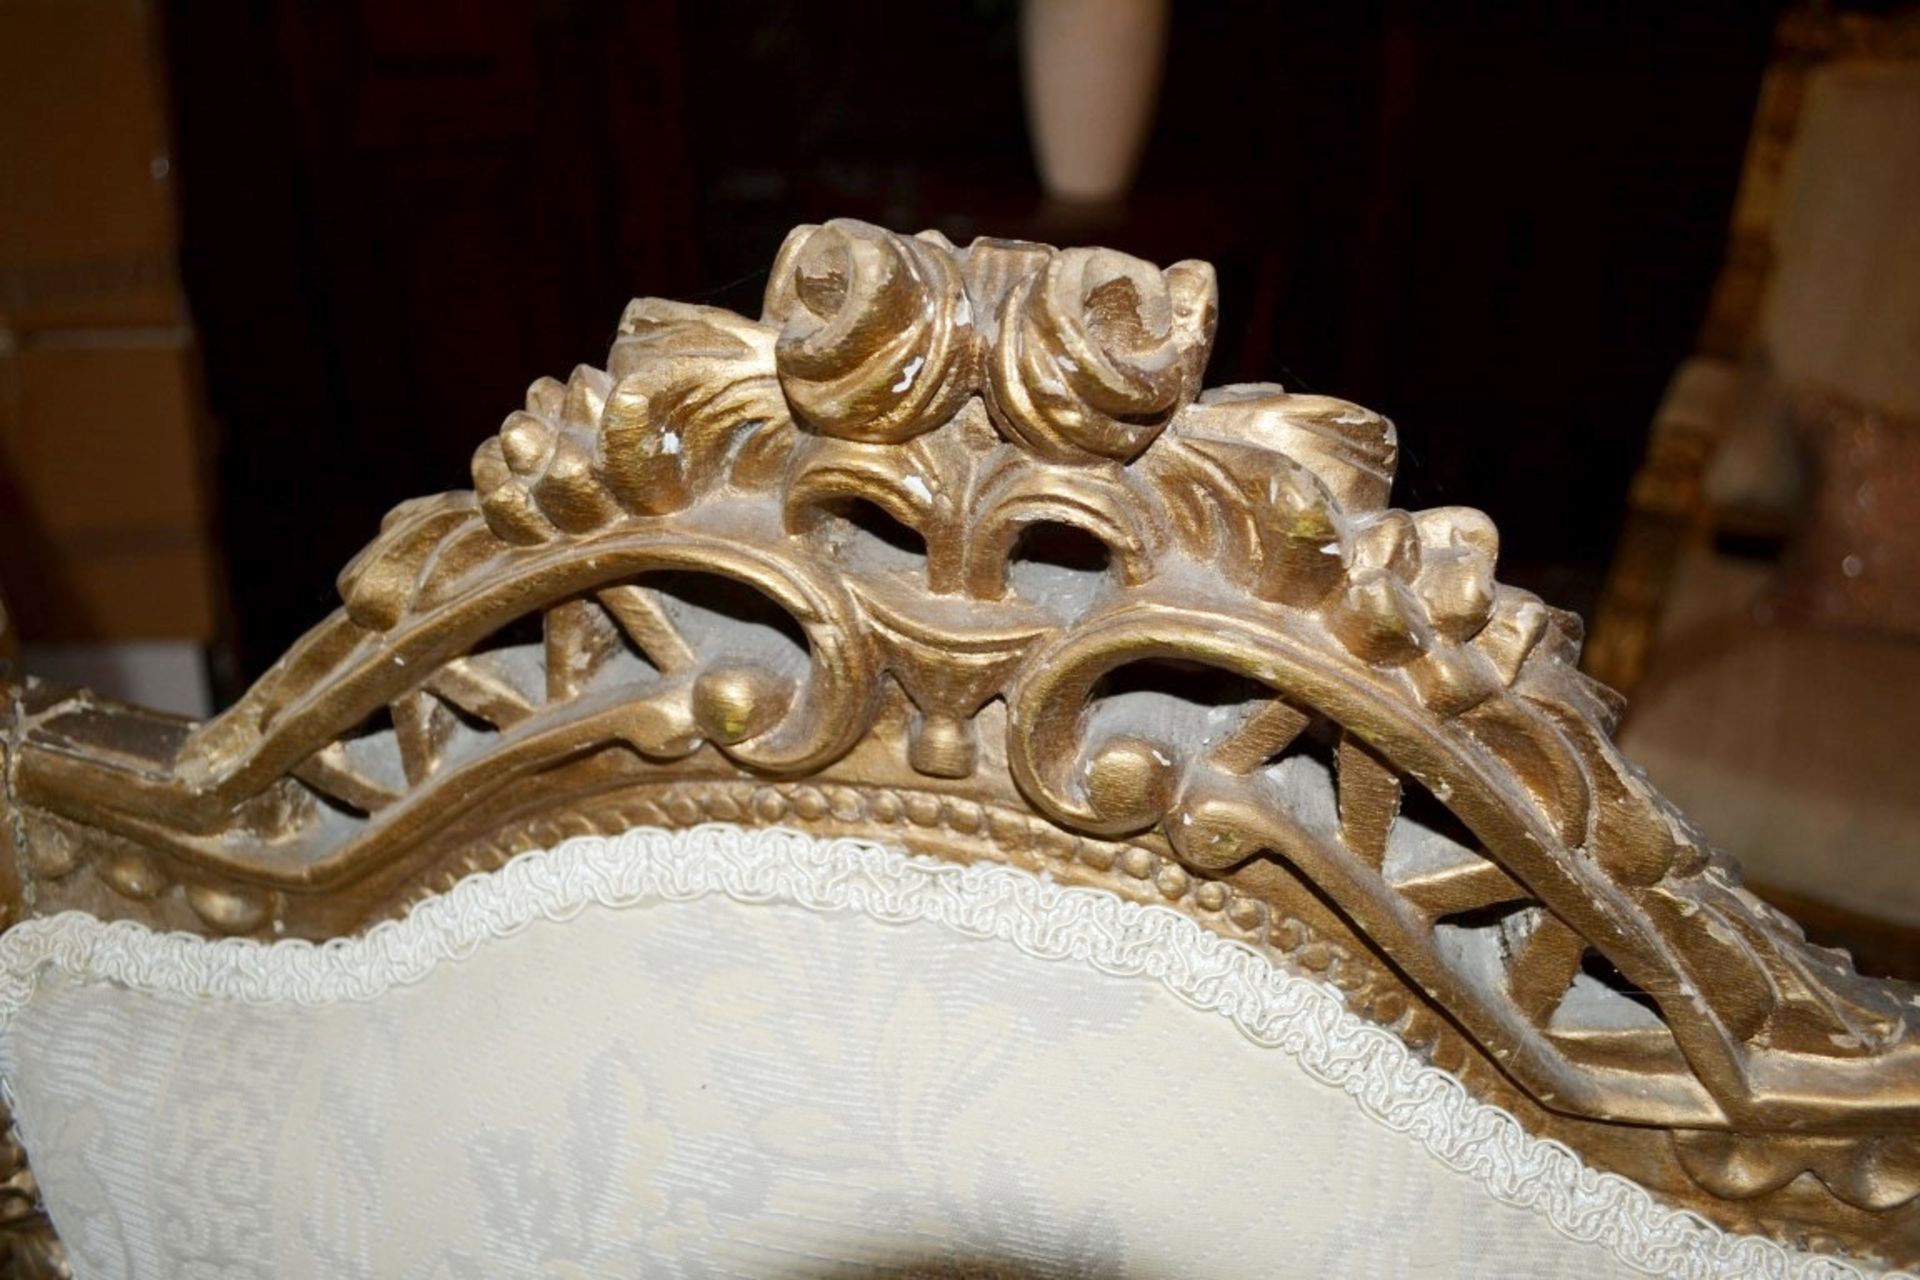 1 x Period Gold Gilt Armchair - Upholstered In A Rich Cream Fabric - From A Grade II Listed Hall - Image 8 of 9